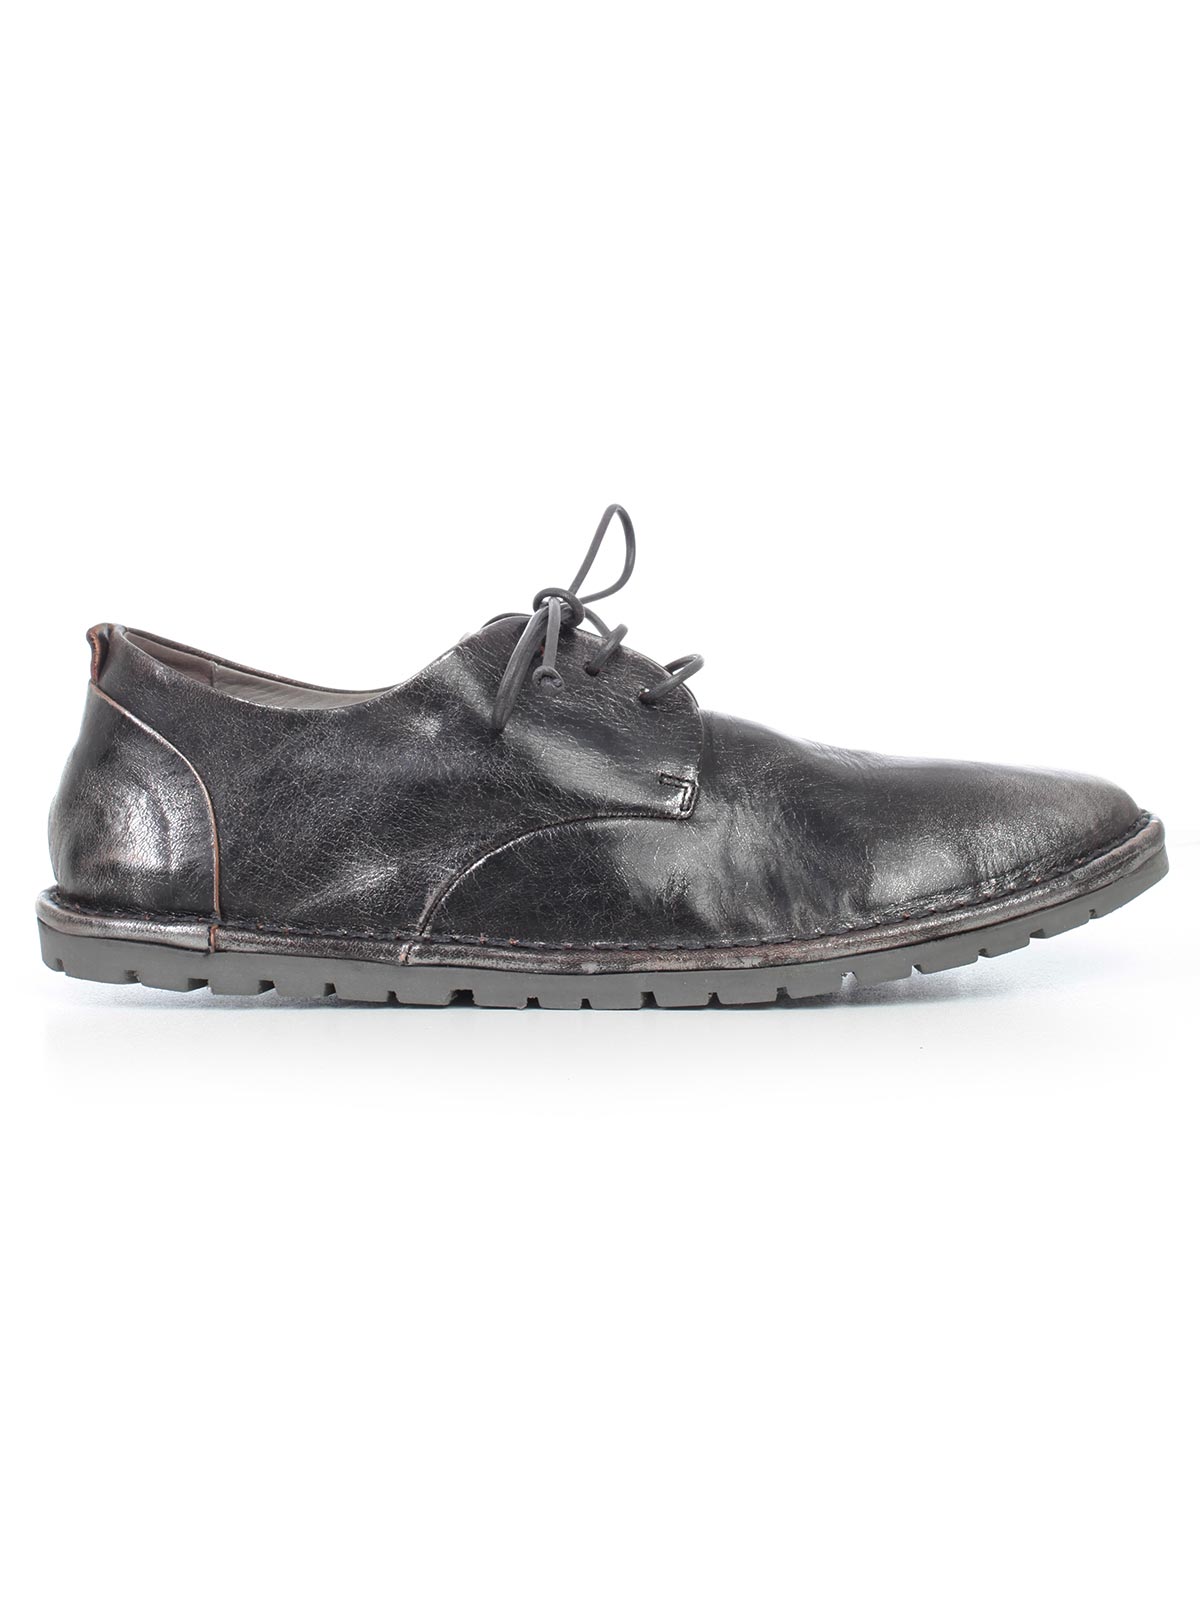 marsell shoes online